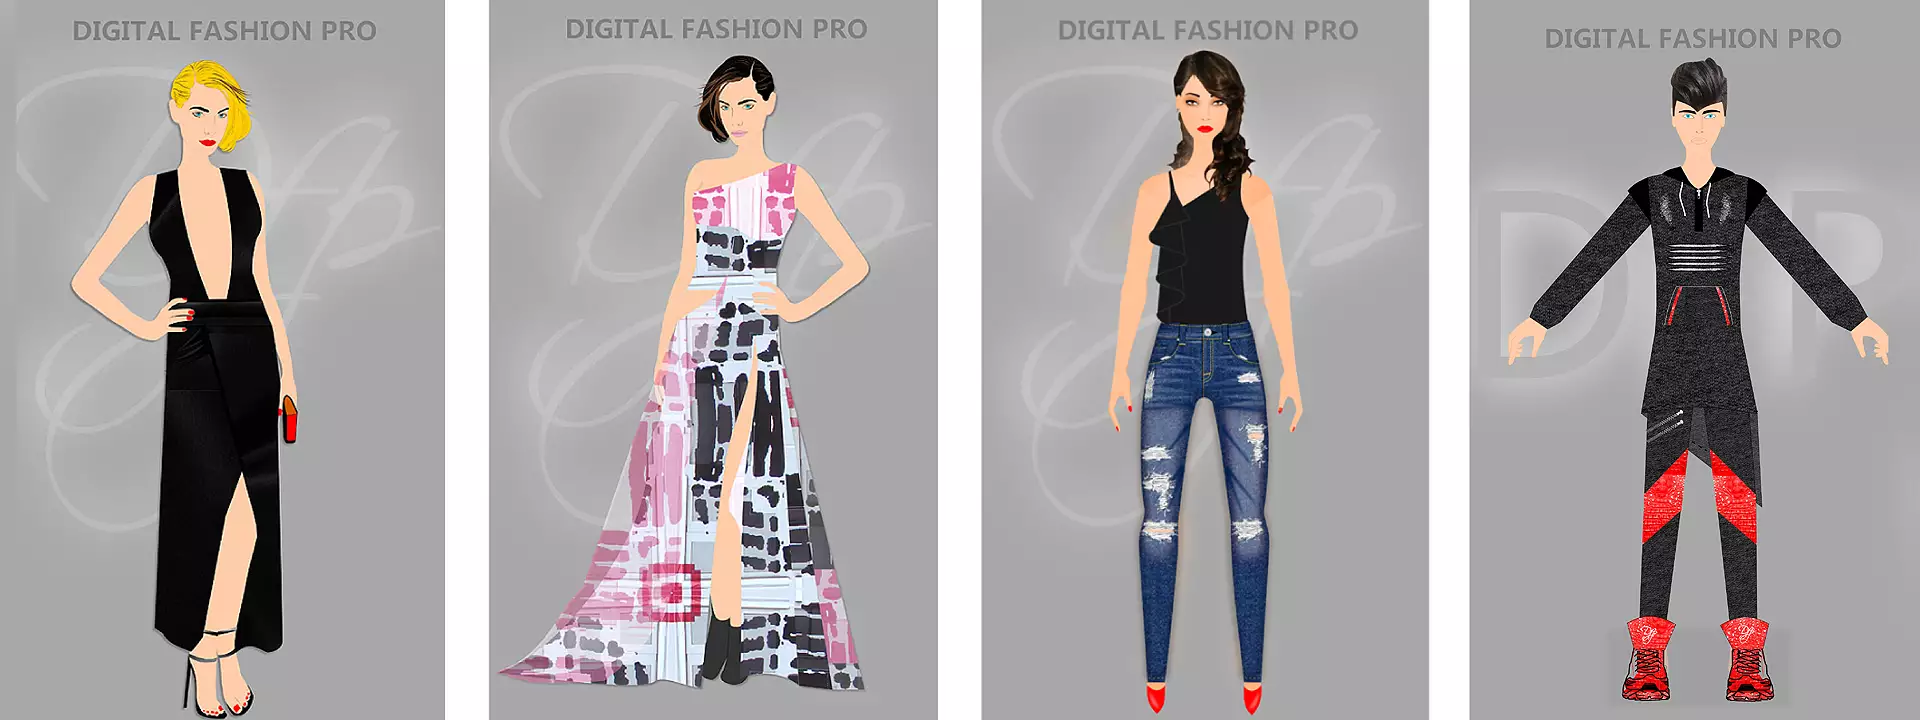 fashion design software - powered sketches